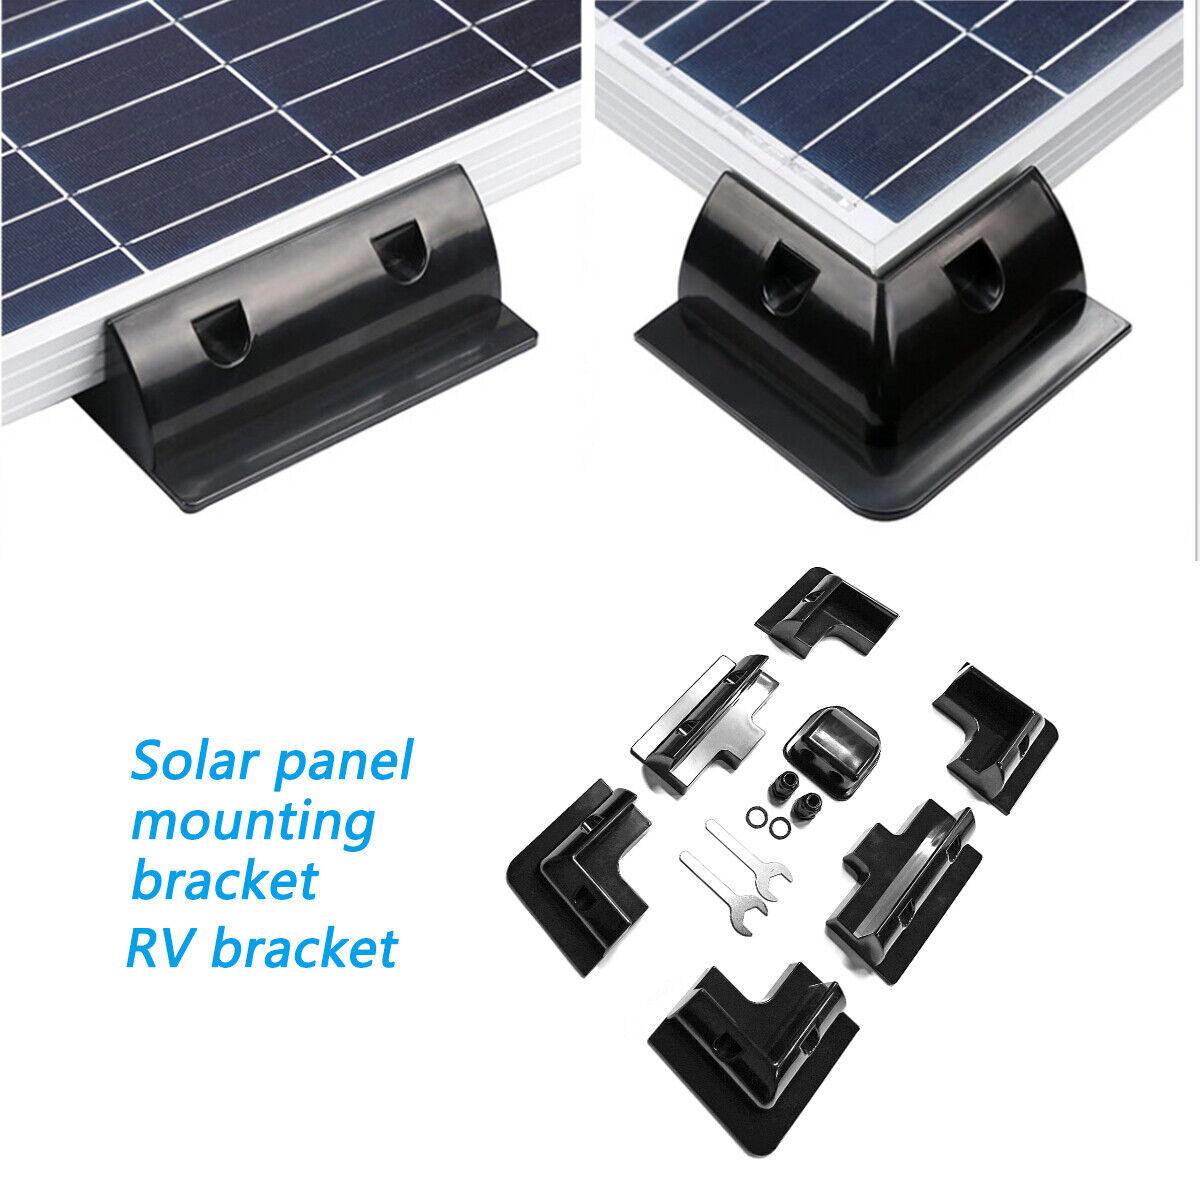 Solar Panel Corner Bracket Roof Solar Panel Mounting Brackets With Cable Entries